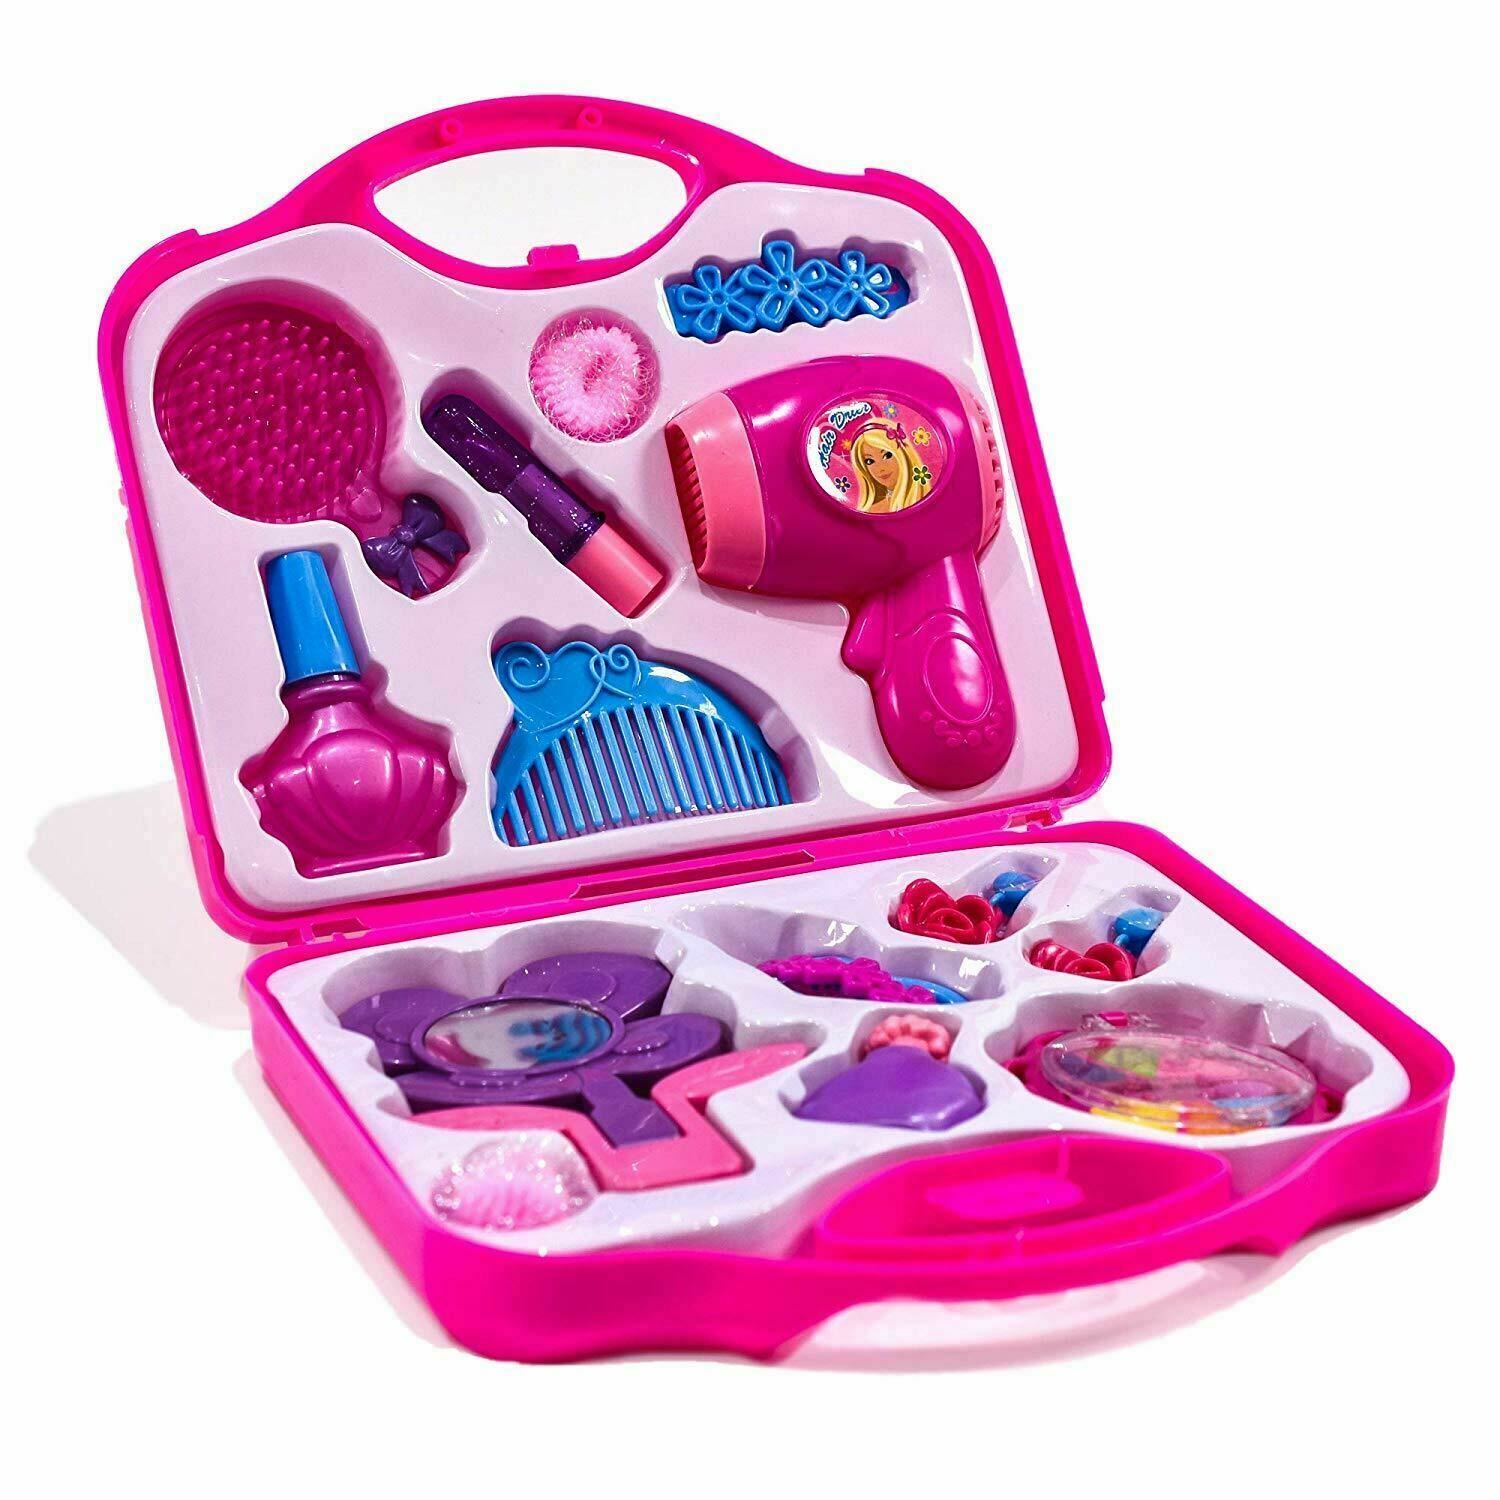 Vanity Beauty Cosmetic Bag The Magic Toy Shop - The Magic Toy Shop